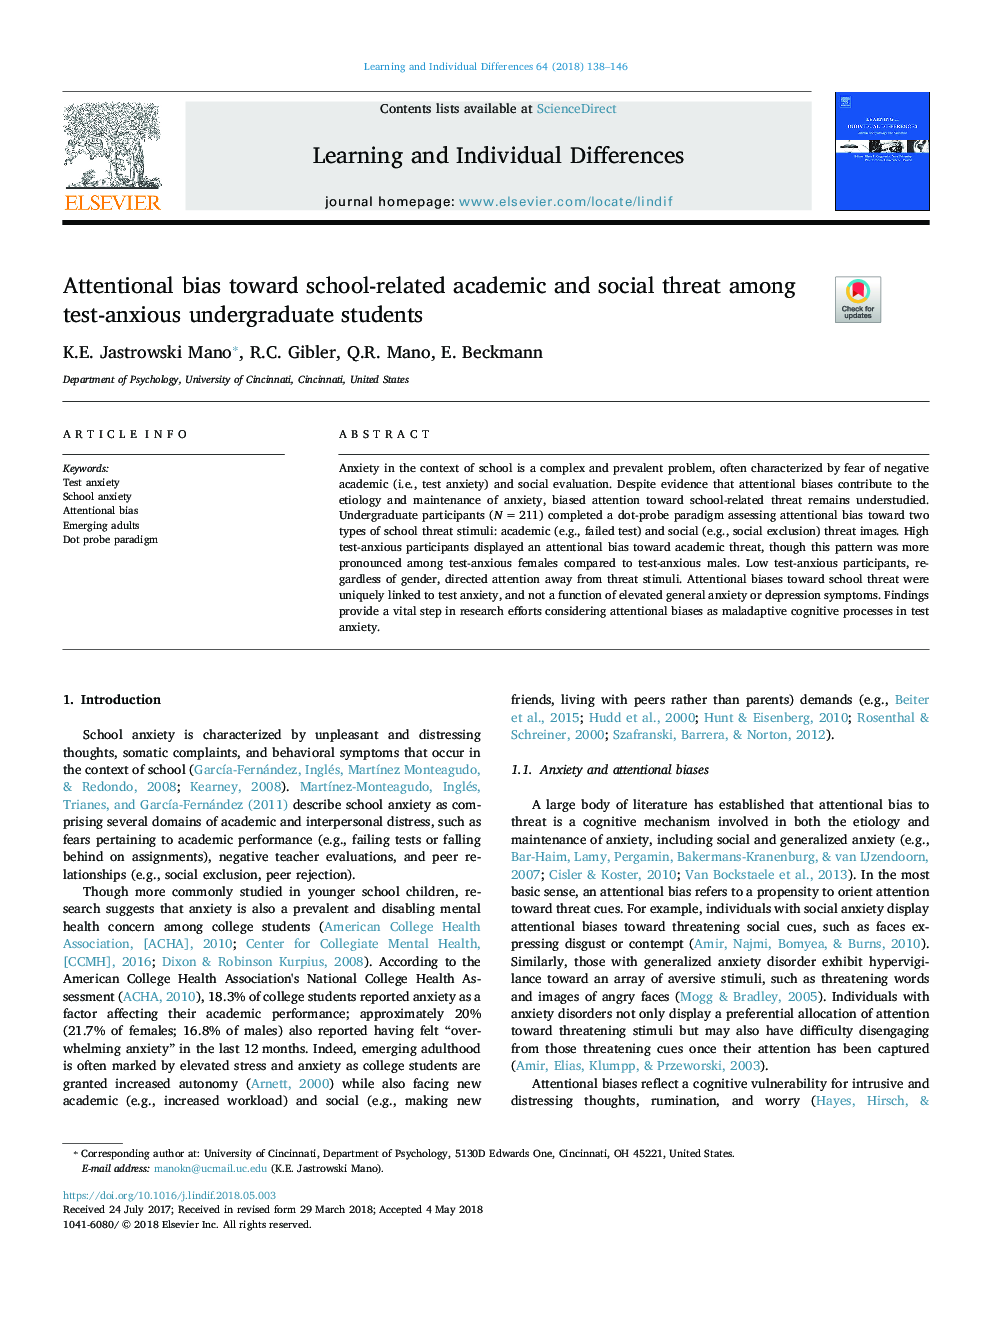 Attentional bias toward school-related academic and social threat among test-anxious undergraduate students